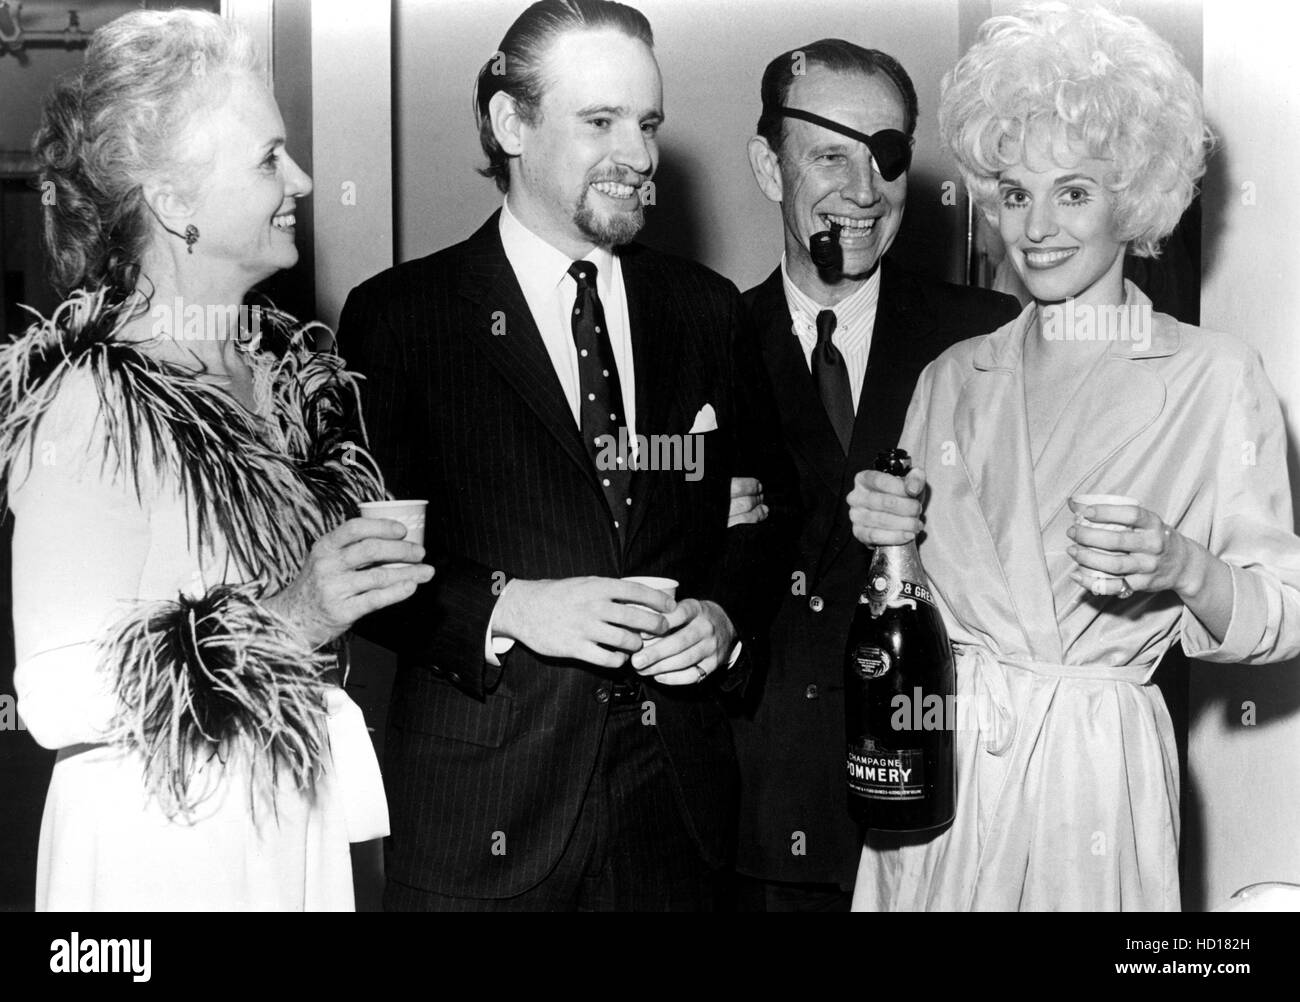 HUME CRONYN, with wife Jessica Tandy, son Christopher Cronyn, and daughter Tandy Cronyn backstage at Broadway's 'Cabaret' where Stock Photo